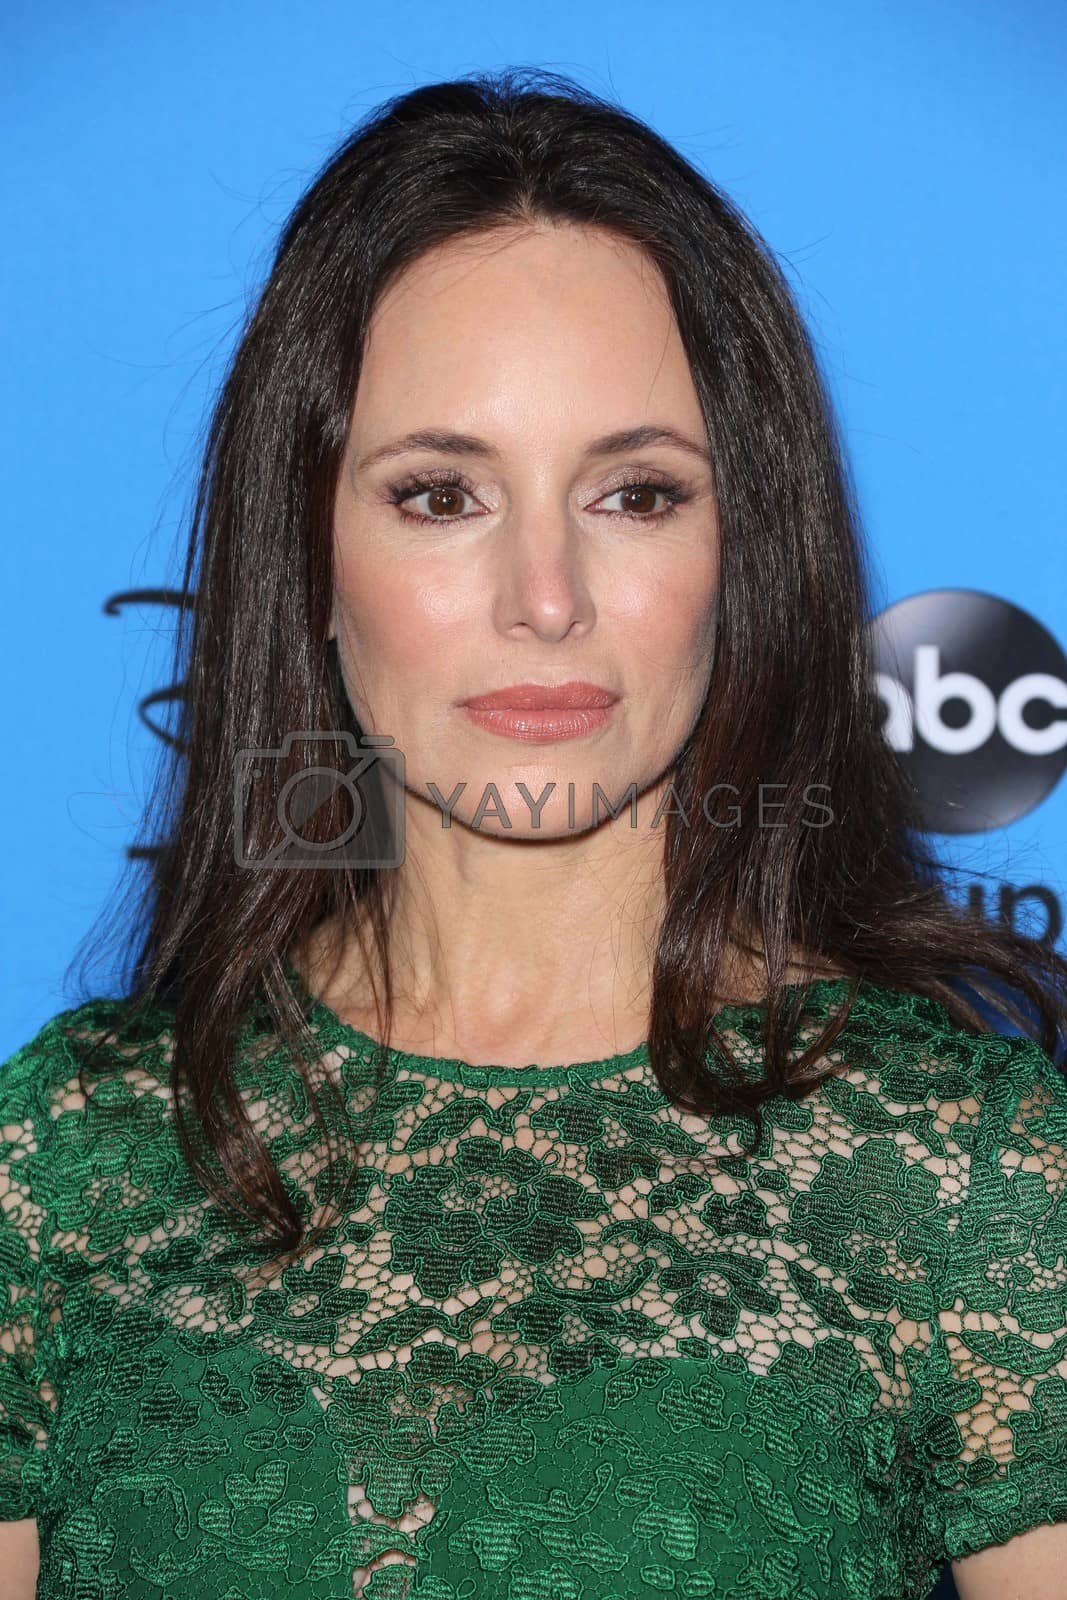 Royalty free image of Madeleine Stowe at the Disney/ABC Summer 2013 TCA Press Tour, Beverly Hilton, Beverly Hills, CA 08-04-13/ImageCollect by ImageCollect